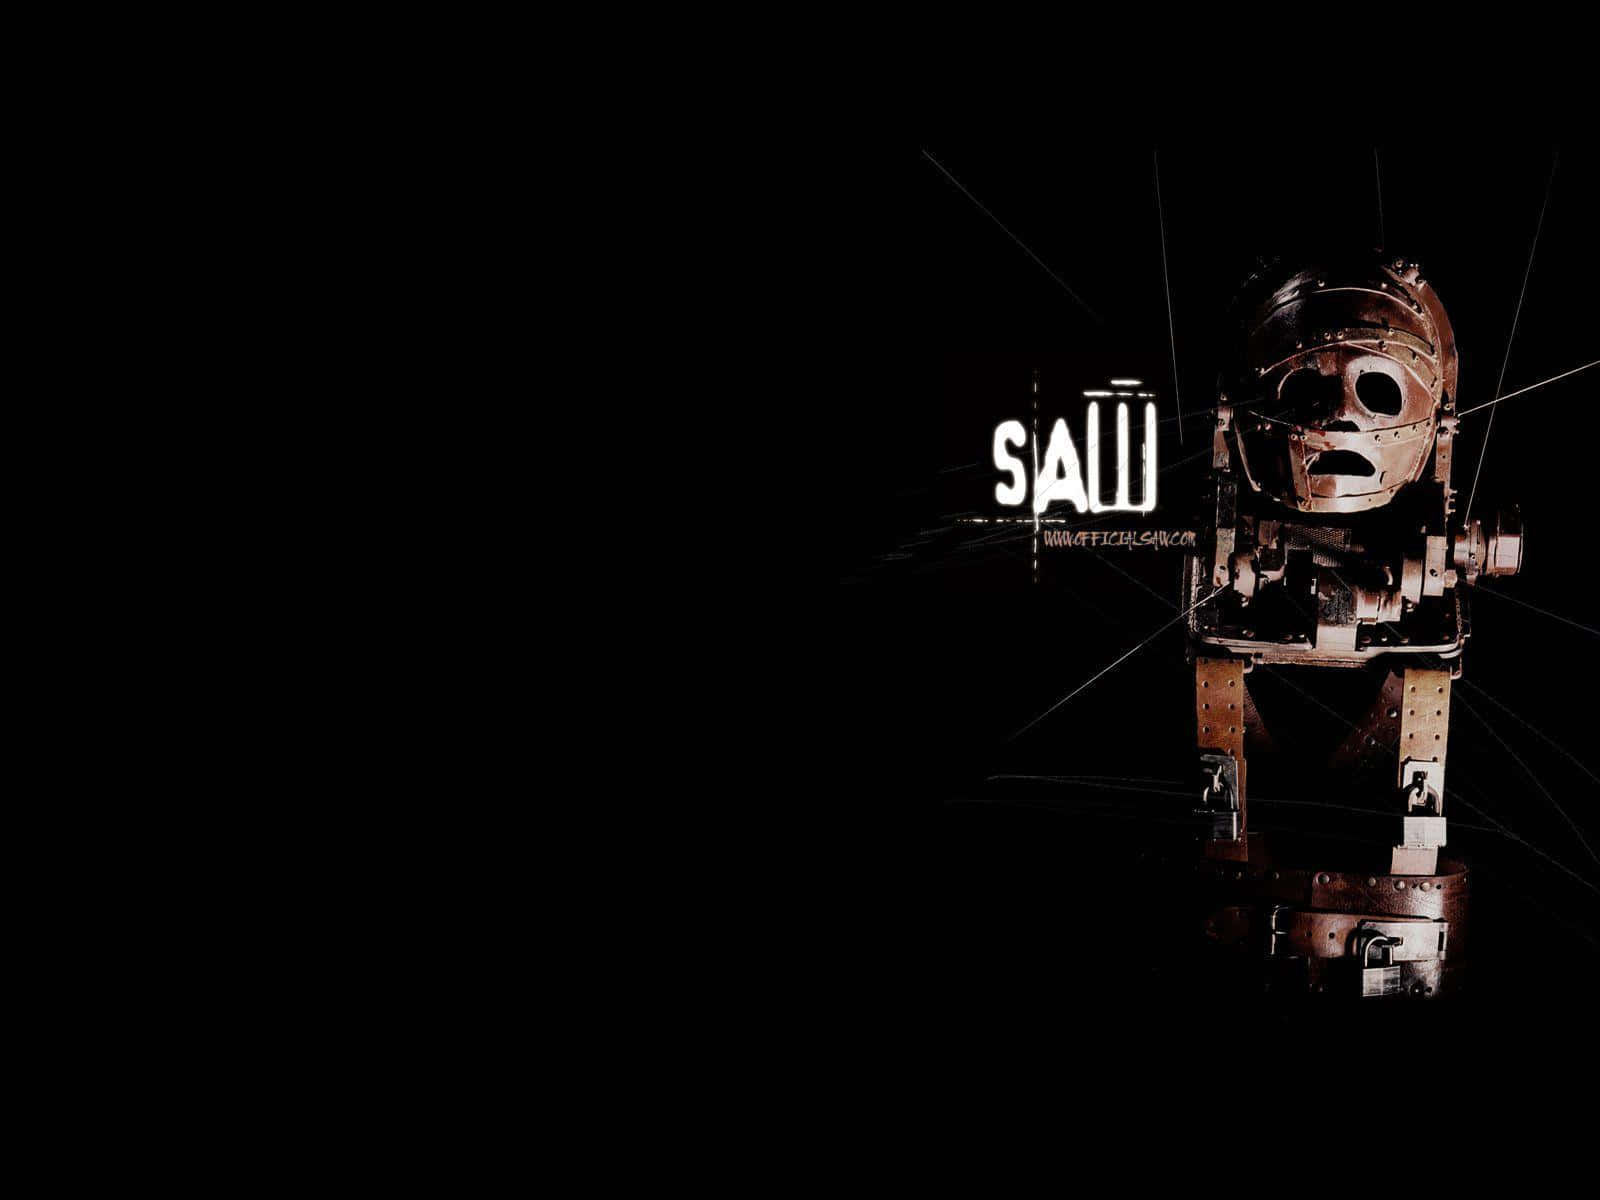 Saw With Scary Mask Wallpaper